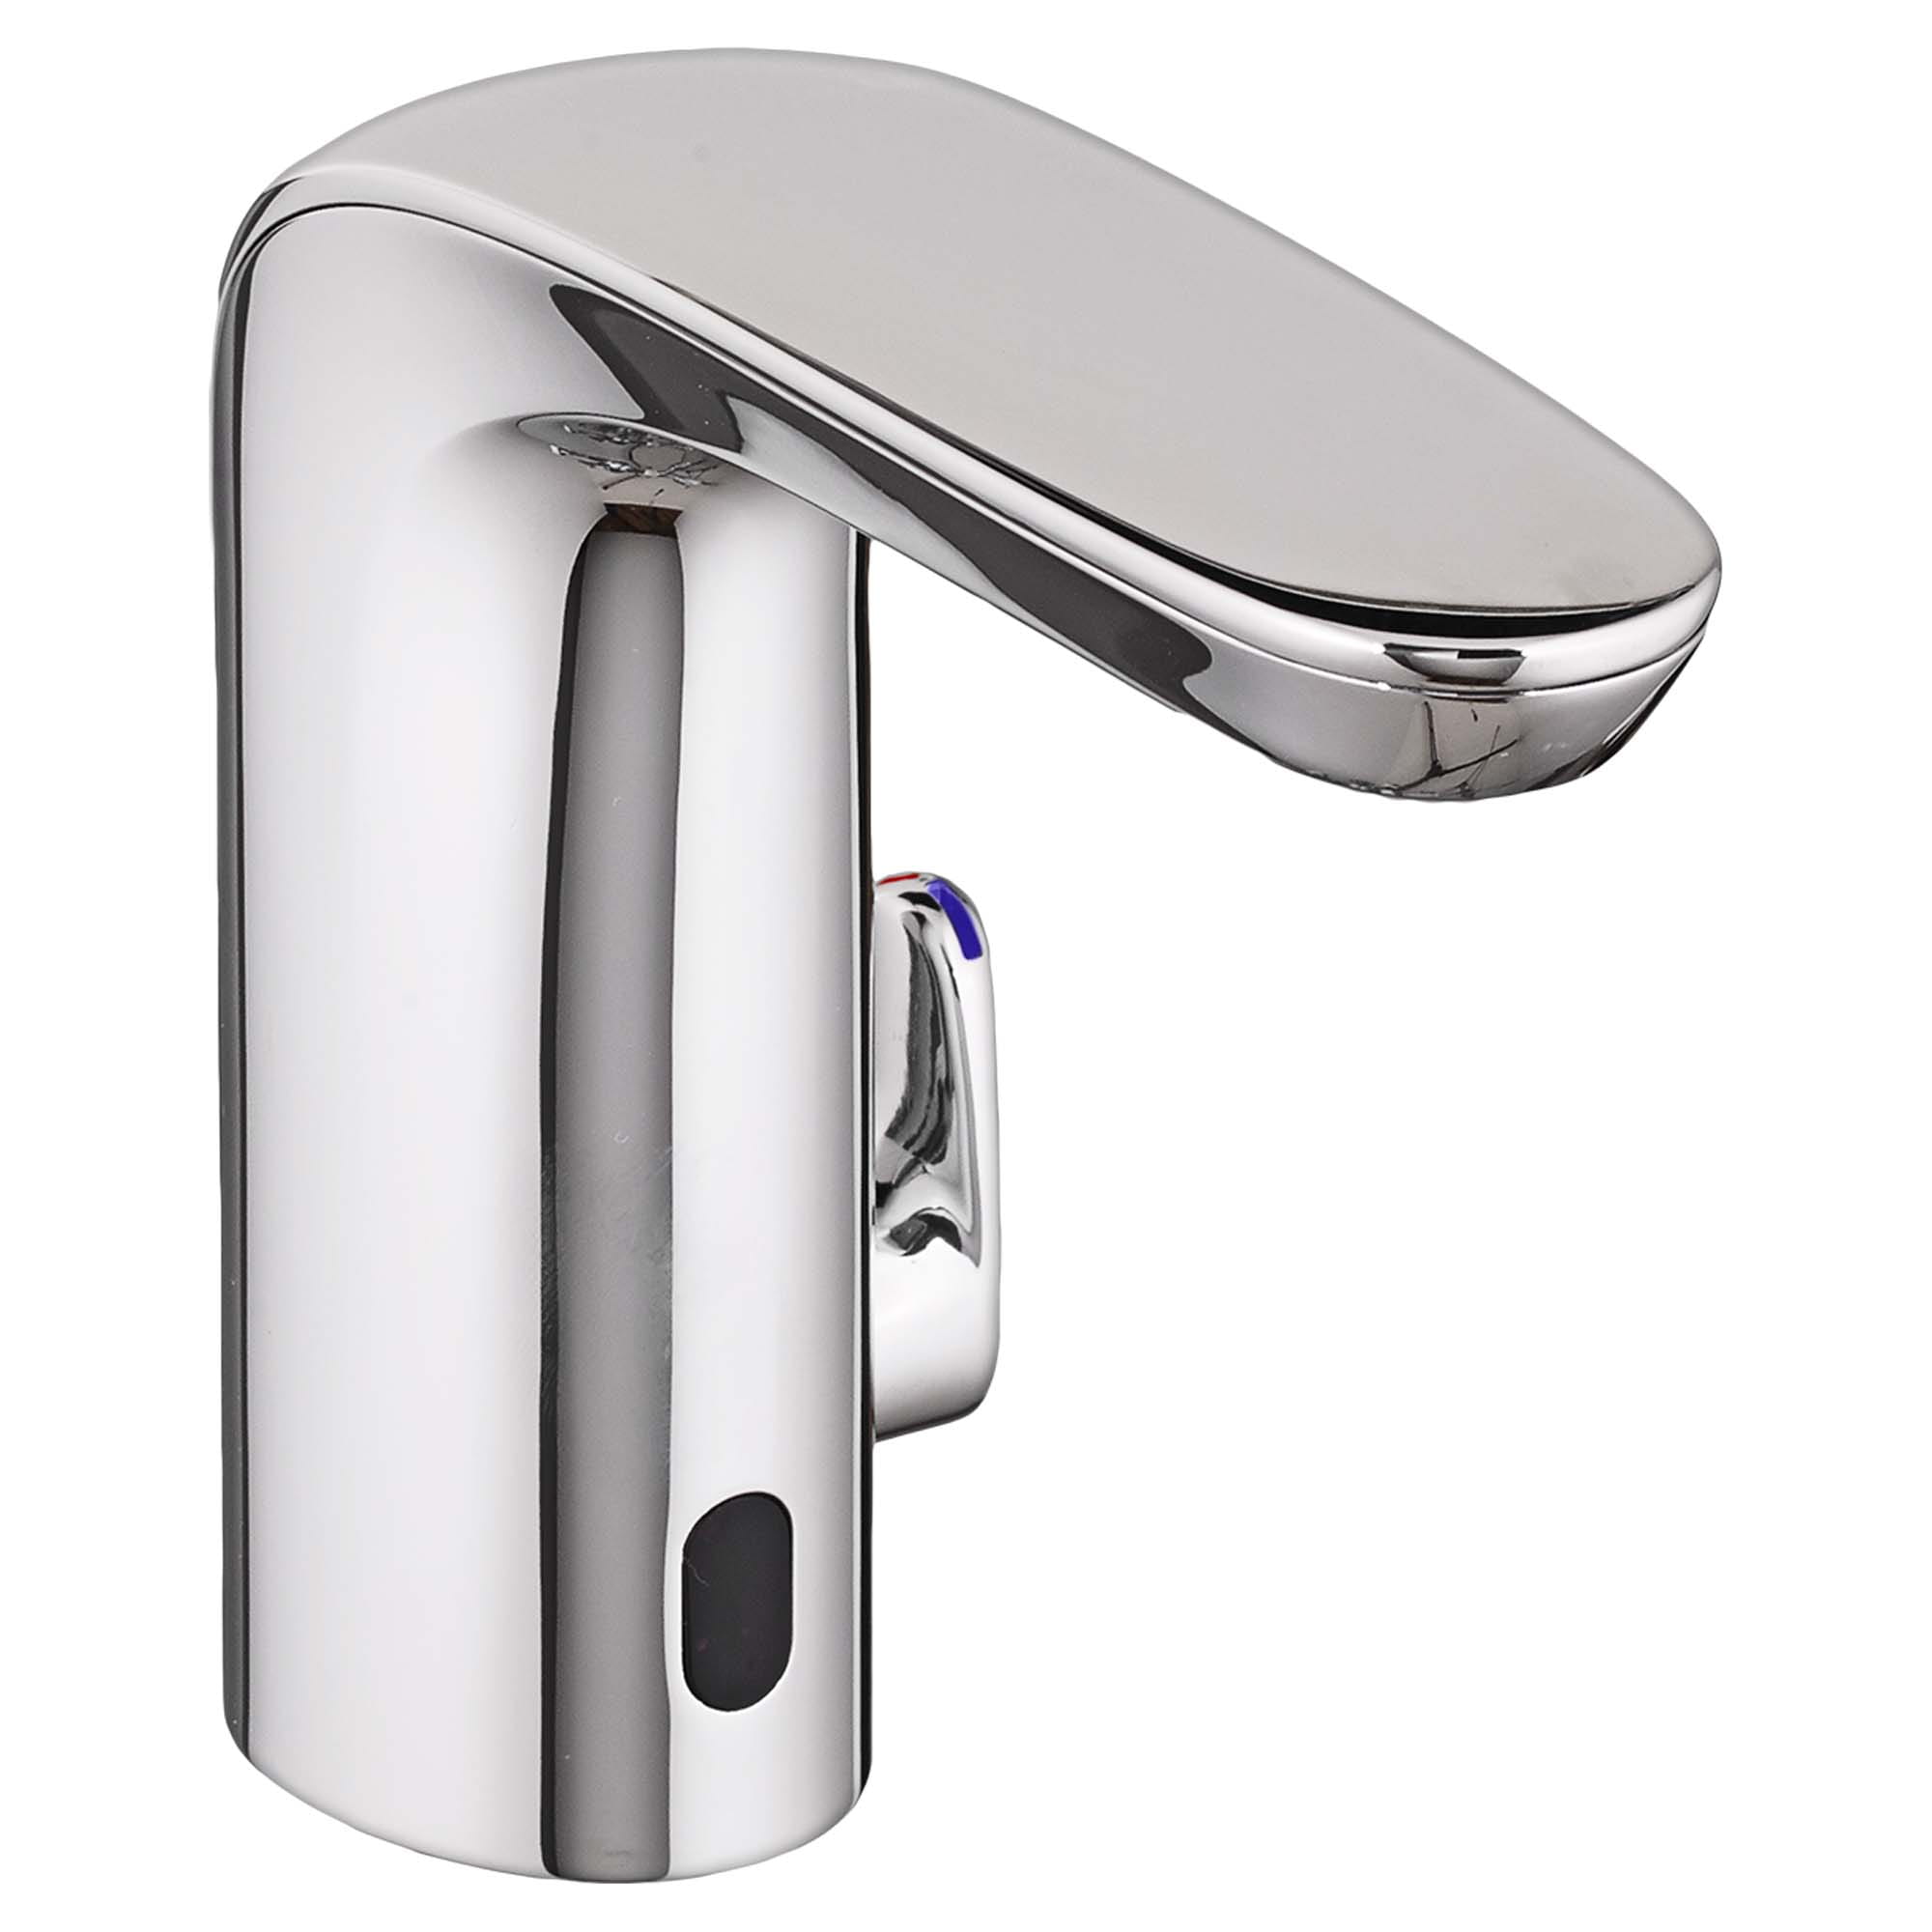 NextGen Selectronic Touchless Faucet Battery Powered With SmarTherm Safety Shut Off  Plus  ADM 035 gpm 13 Lpm CHROME